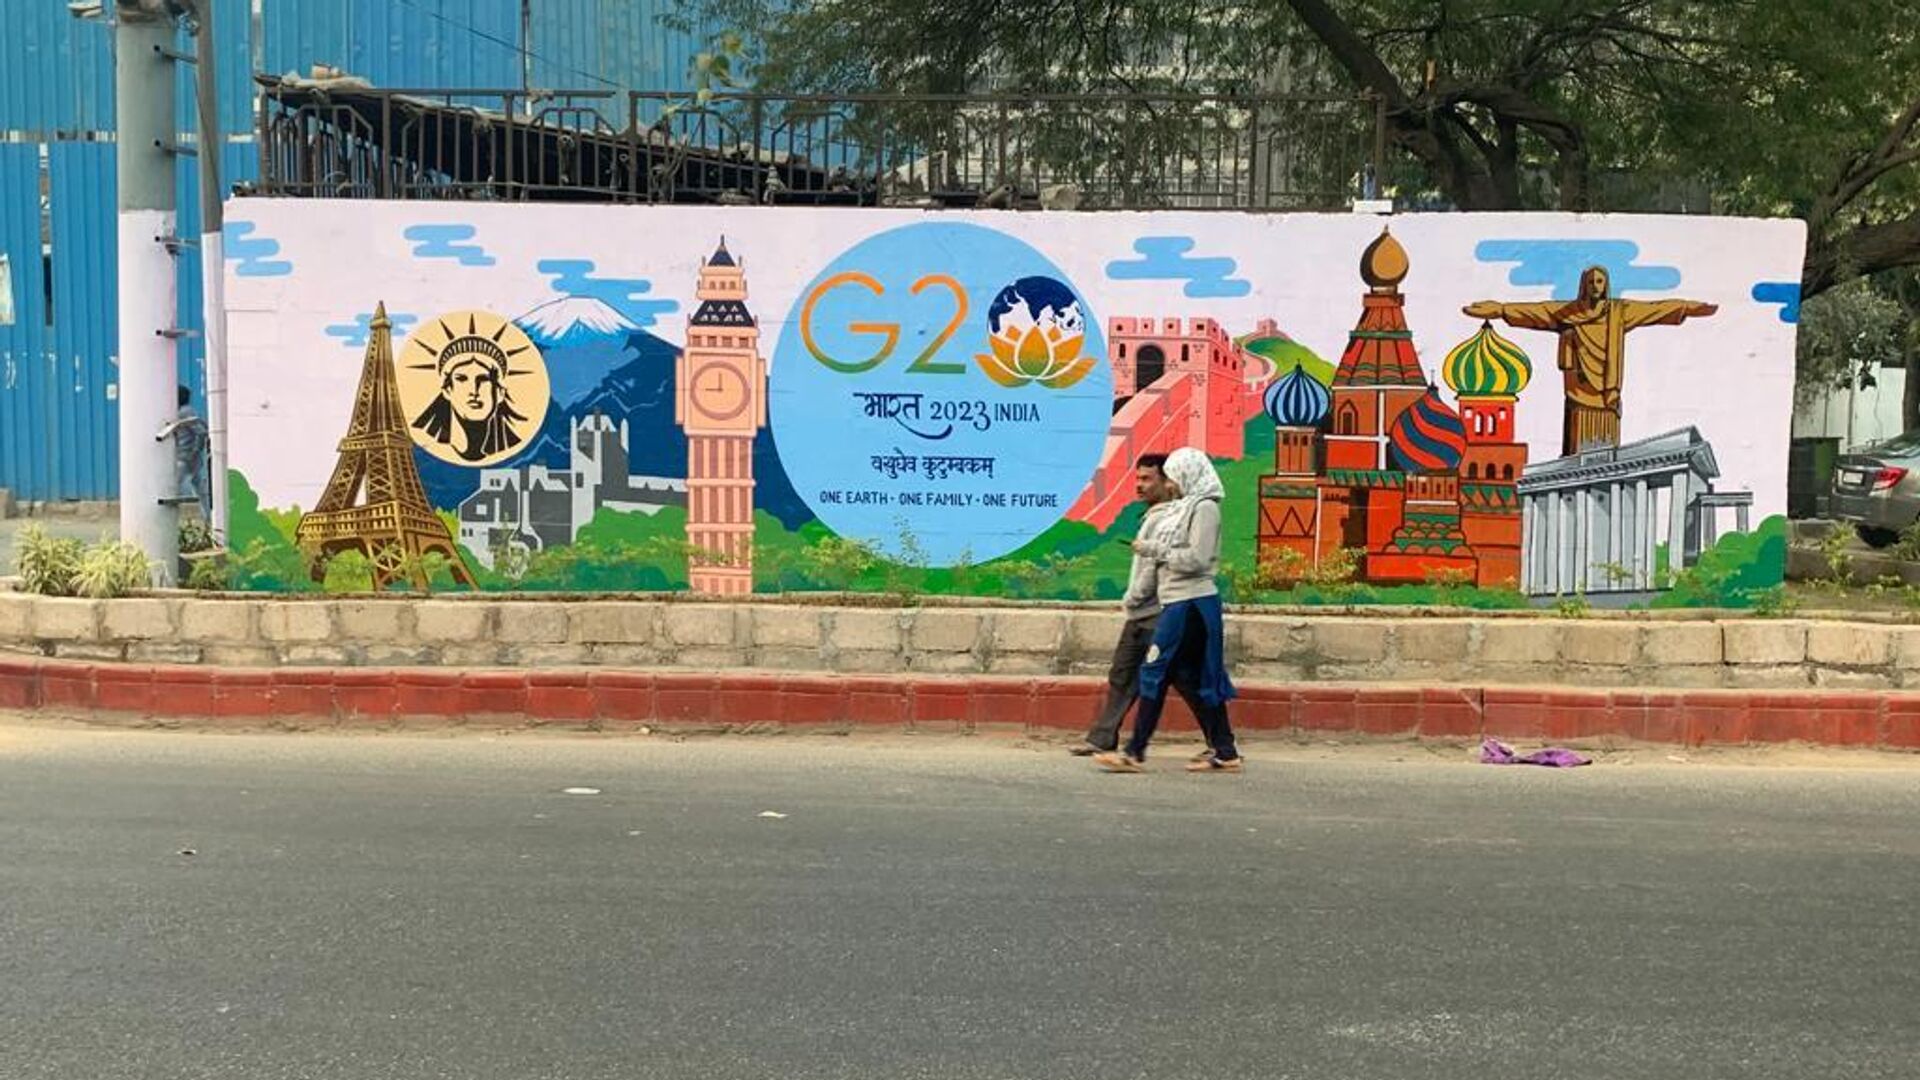 Delhi Street Art artists painted the town with creative murals on the walls of flyovers, pillars and buildings ahead of G20 Summit in New Delhi. - Sputnik India, 1920, 09.09.2023